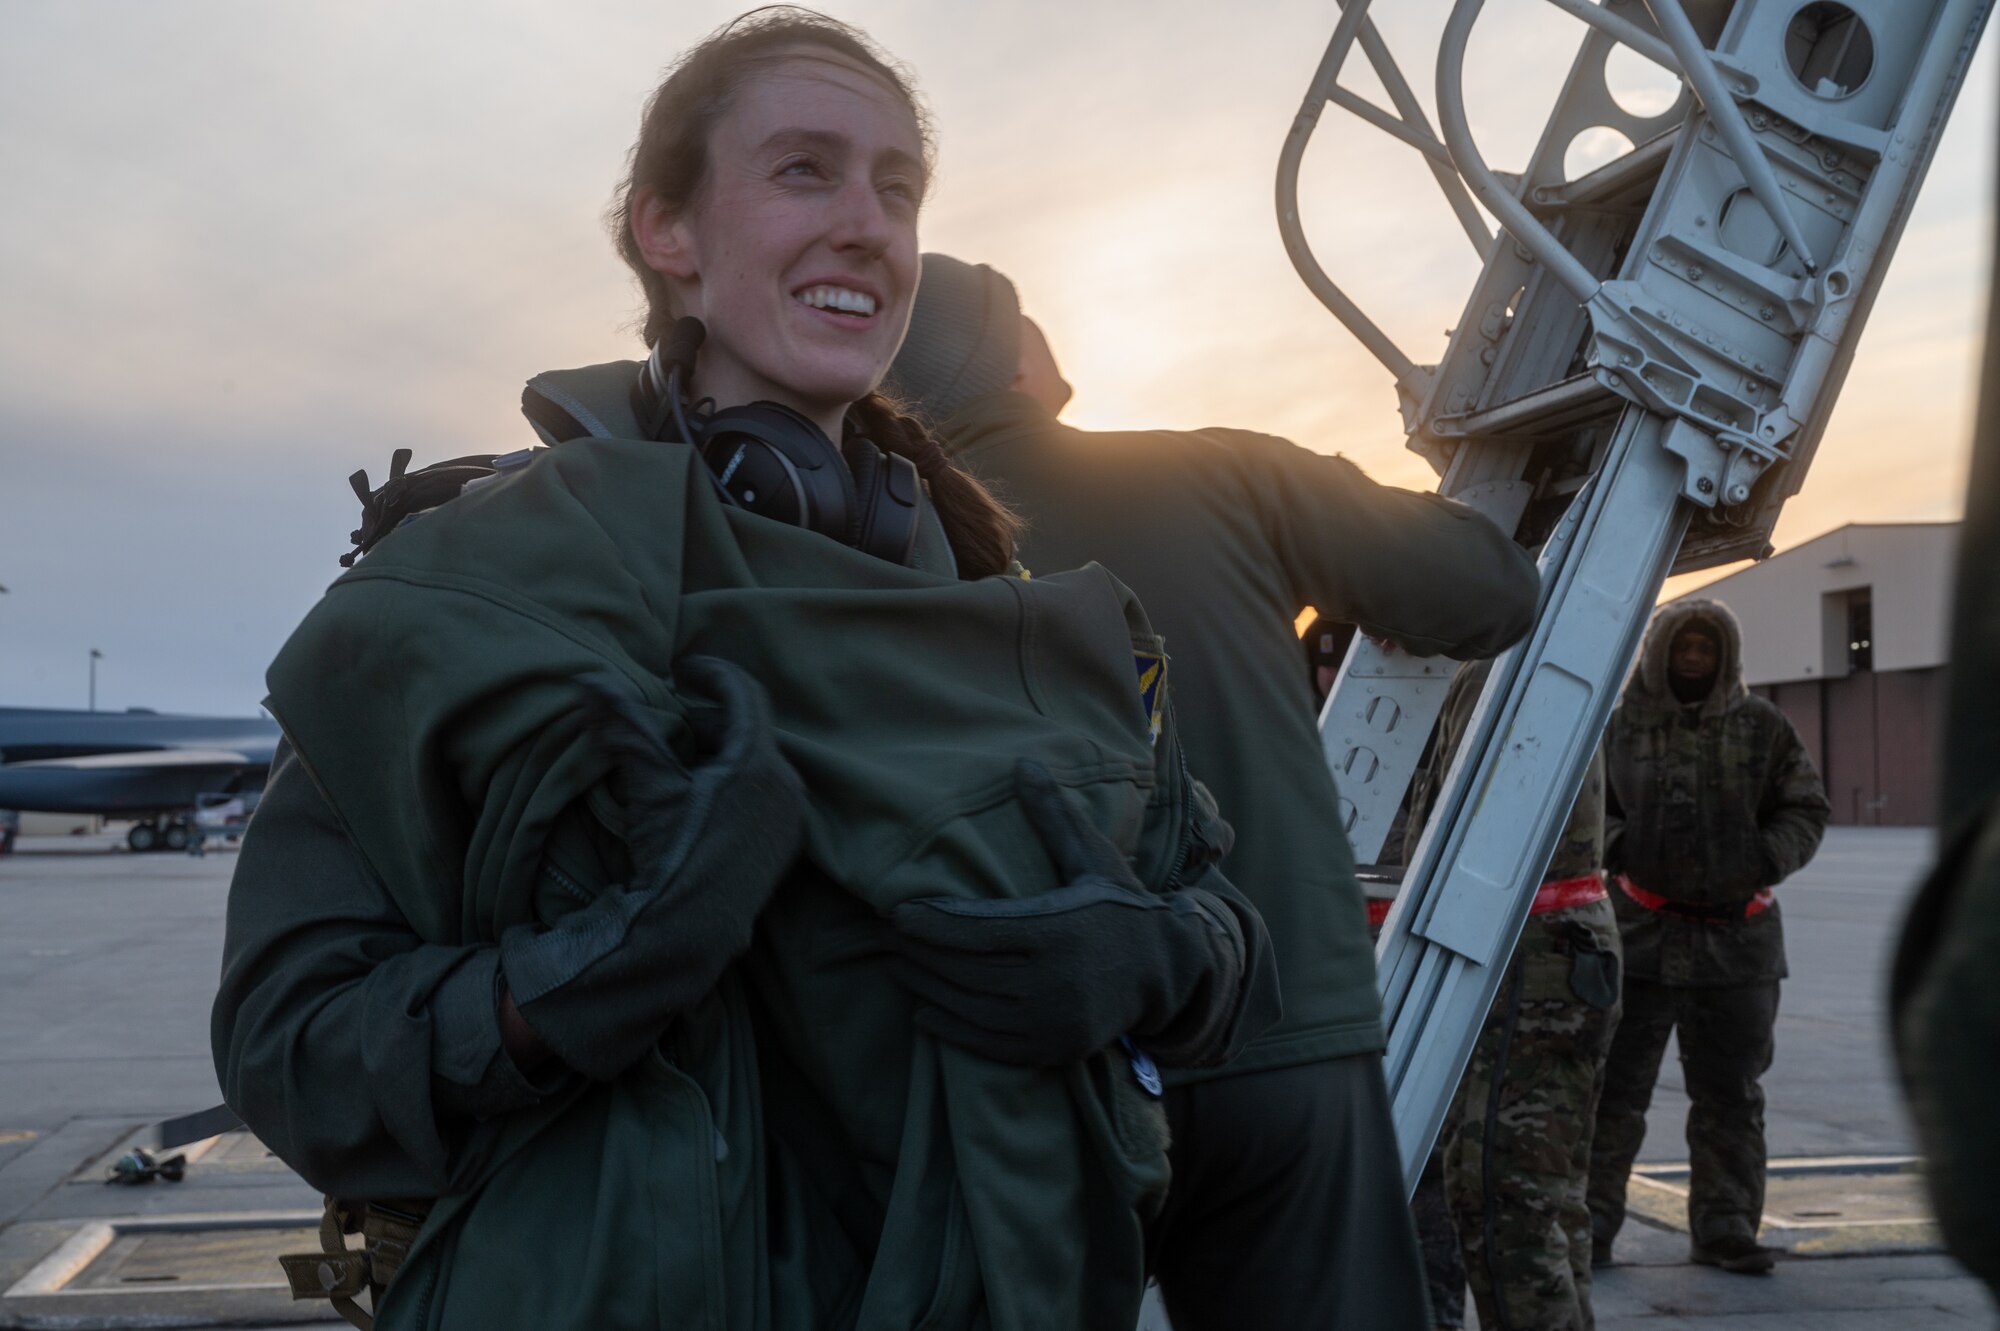 1st Lt. Meaghan Dowd, 34th Bomb Squadron aircrew member, disembarks from a B-1B Lancer after a Bomber Task Force mission at Ellsworth Air Force Base, S.D., Feb. 1, 2022. The B-1B Lancers participated in a long-distance, roundtrip flight from the United States to the United Kingdom in order to commemorate the 80th anniversary of the Eighth Air Force. (U.S. Air Force photo by Senior Airman Michael Ward)